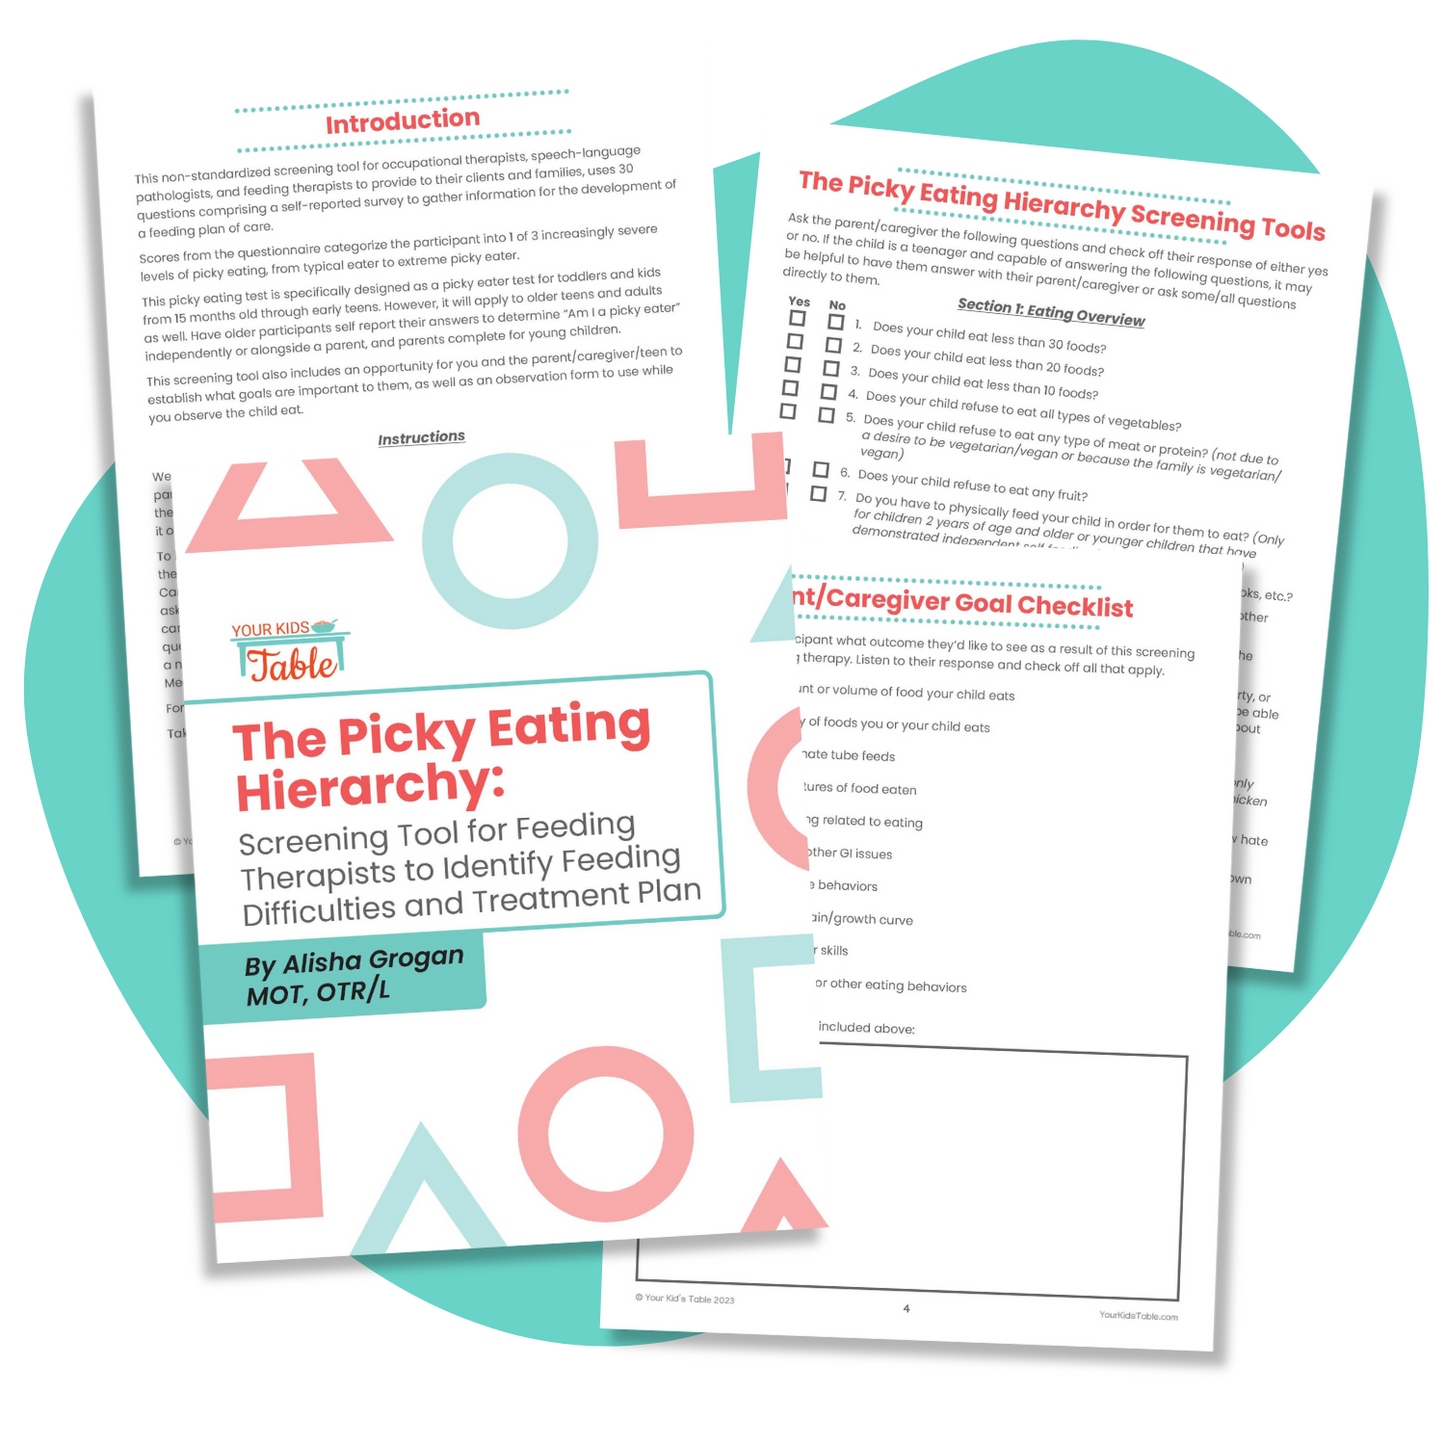 The Picky Eating Hierarchy: Screening Tool to Identify Feeding Difficulties and Treatment Plan